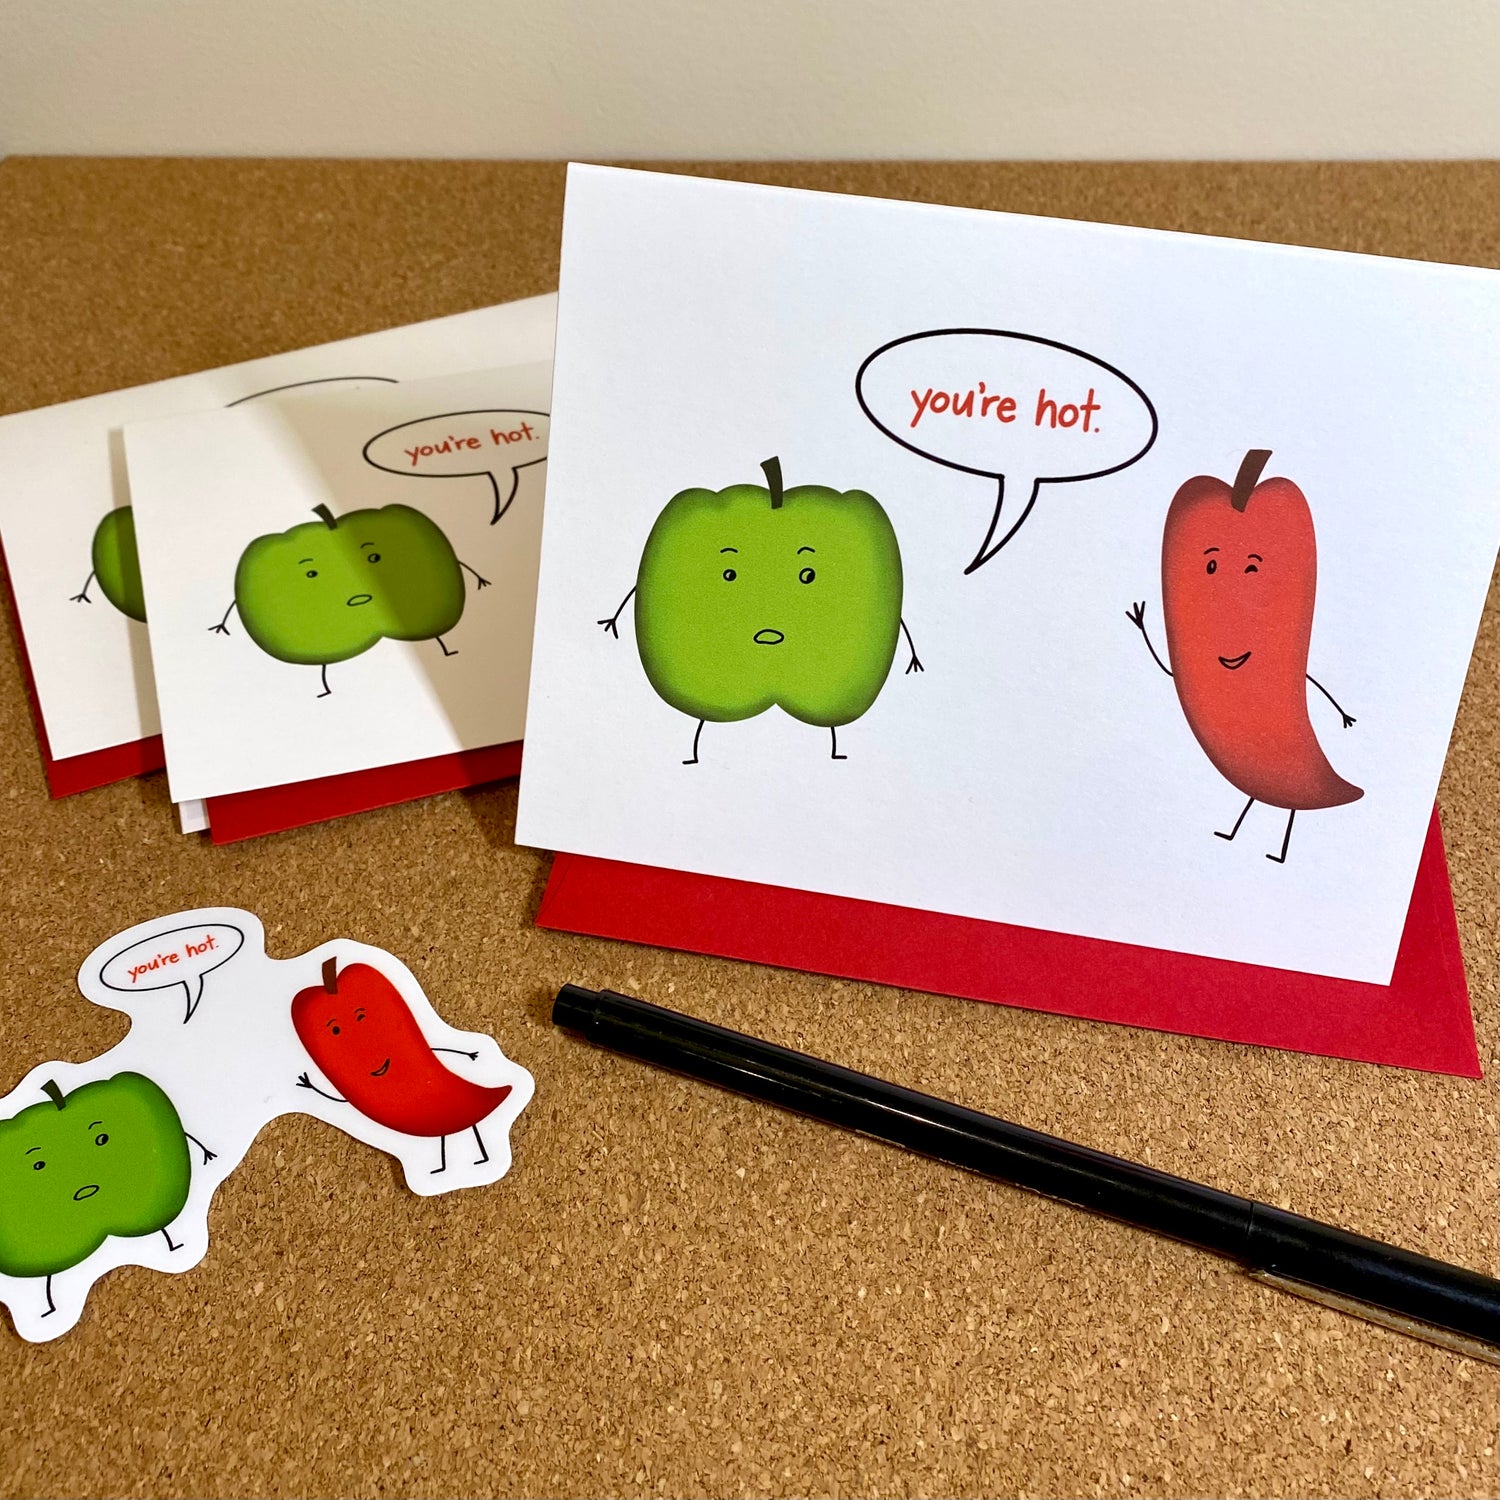 Funny, punny card with a green pepper telling a spicy pepper, "you're hot."